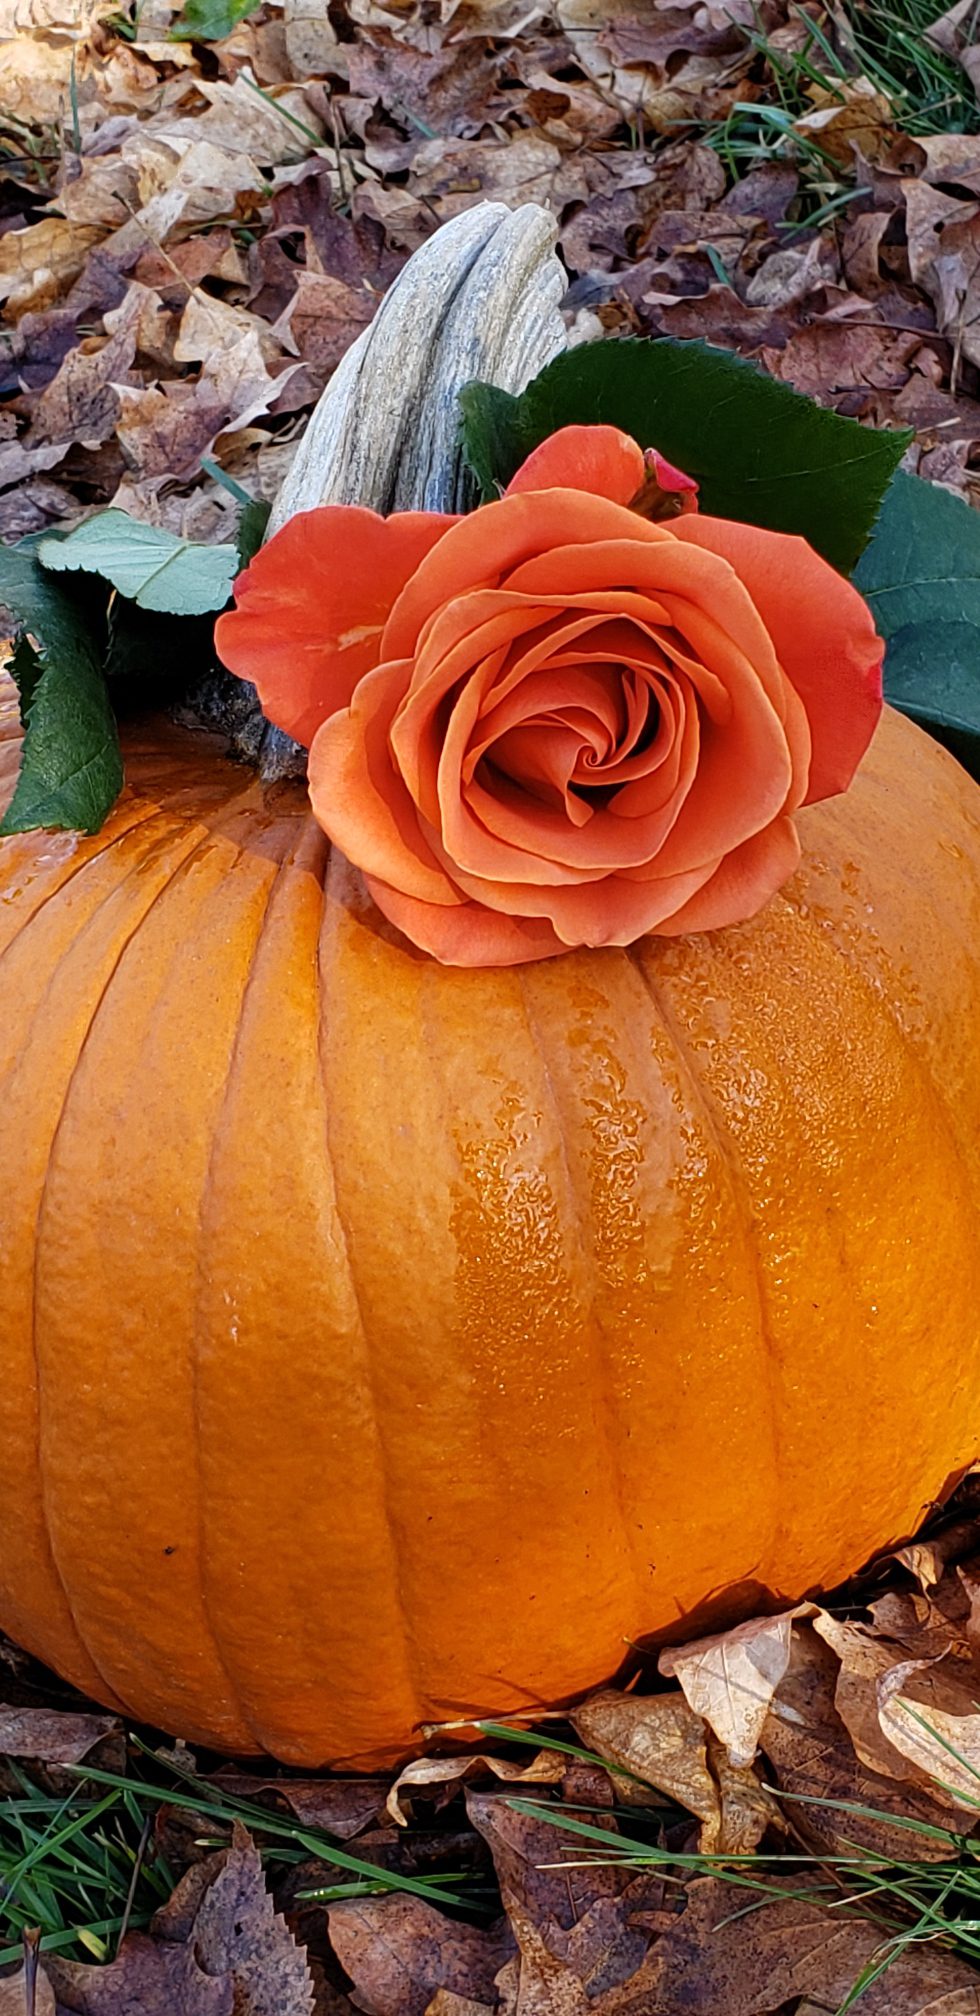 picture of a pumpkin with dried fall leaves and fake orange flower on top by the stem